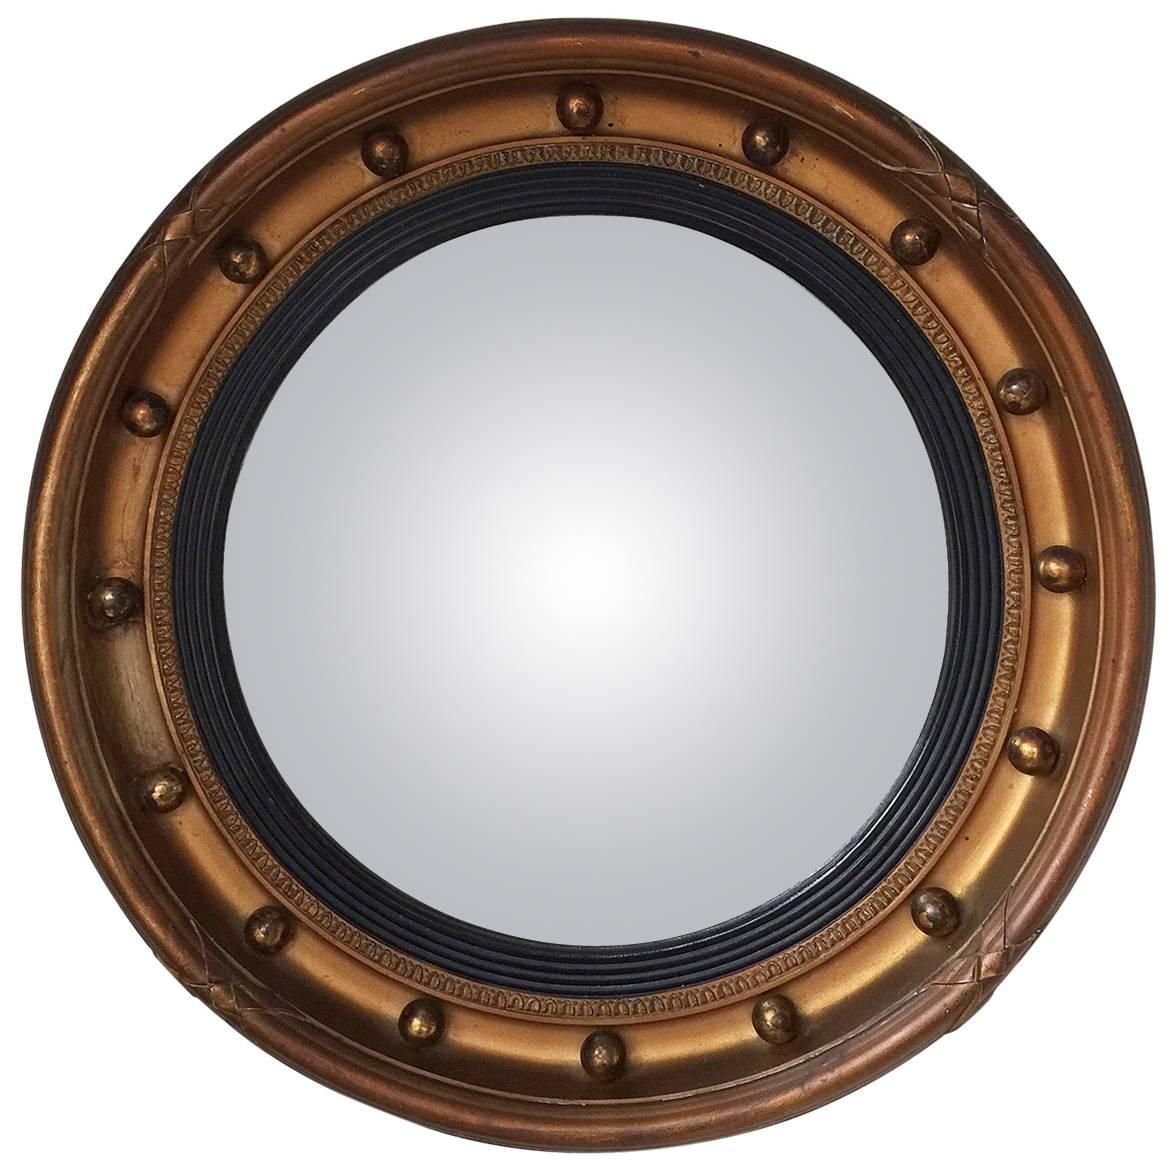 Antique Regency Style English Early 20th Century Gilt Gesso Convex Mirror